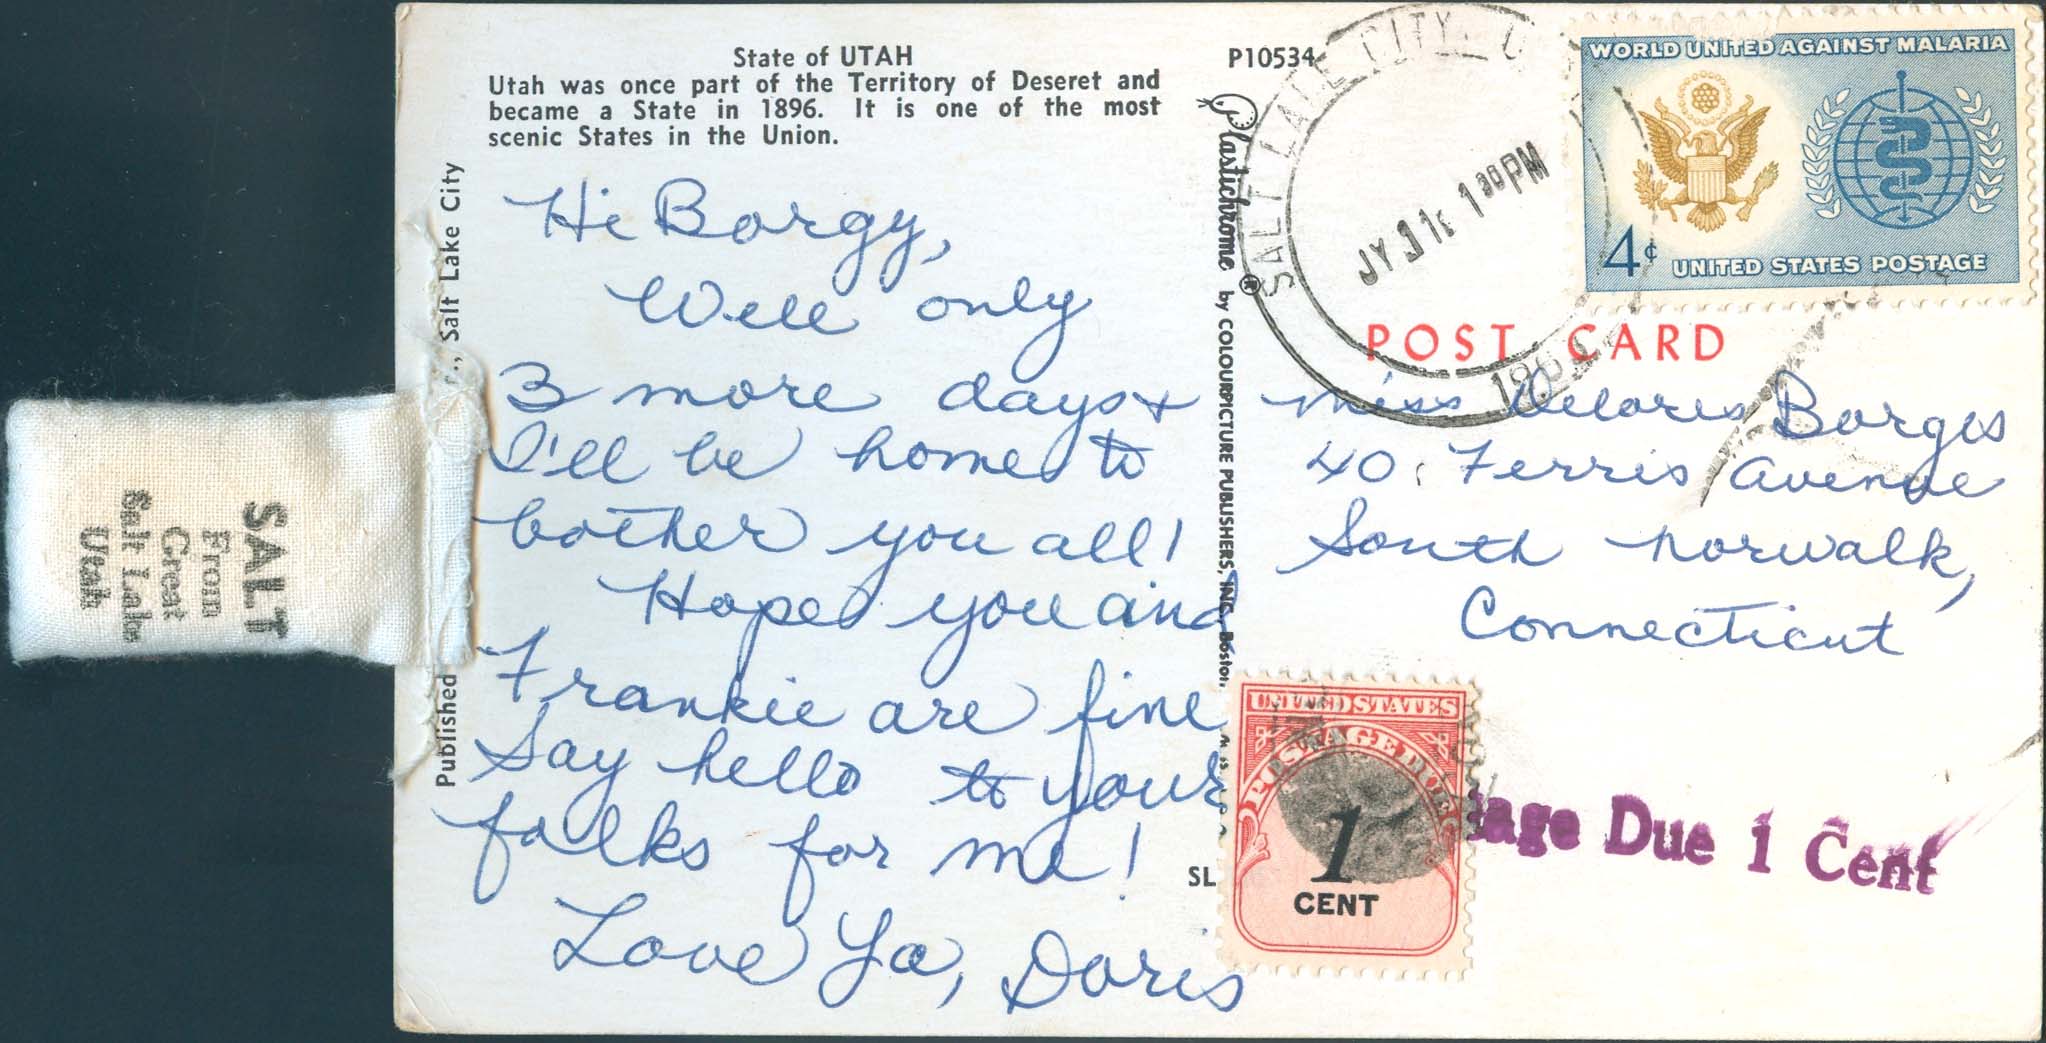 1963, July 31st. Salt Lake City, UT to South Norwalk, CN. Sender attempting to send postcard at the 4¢ postcard rate but with the salt bag was attached, the letter rate applied. Postage Due 1 ¢